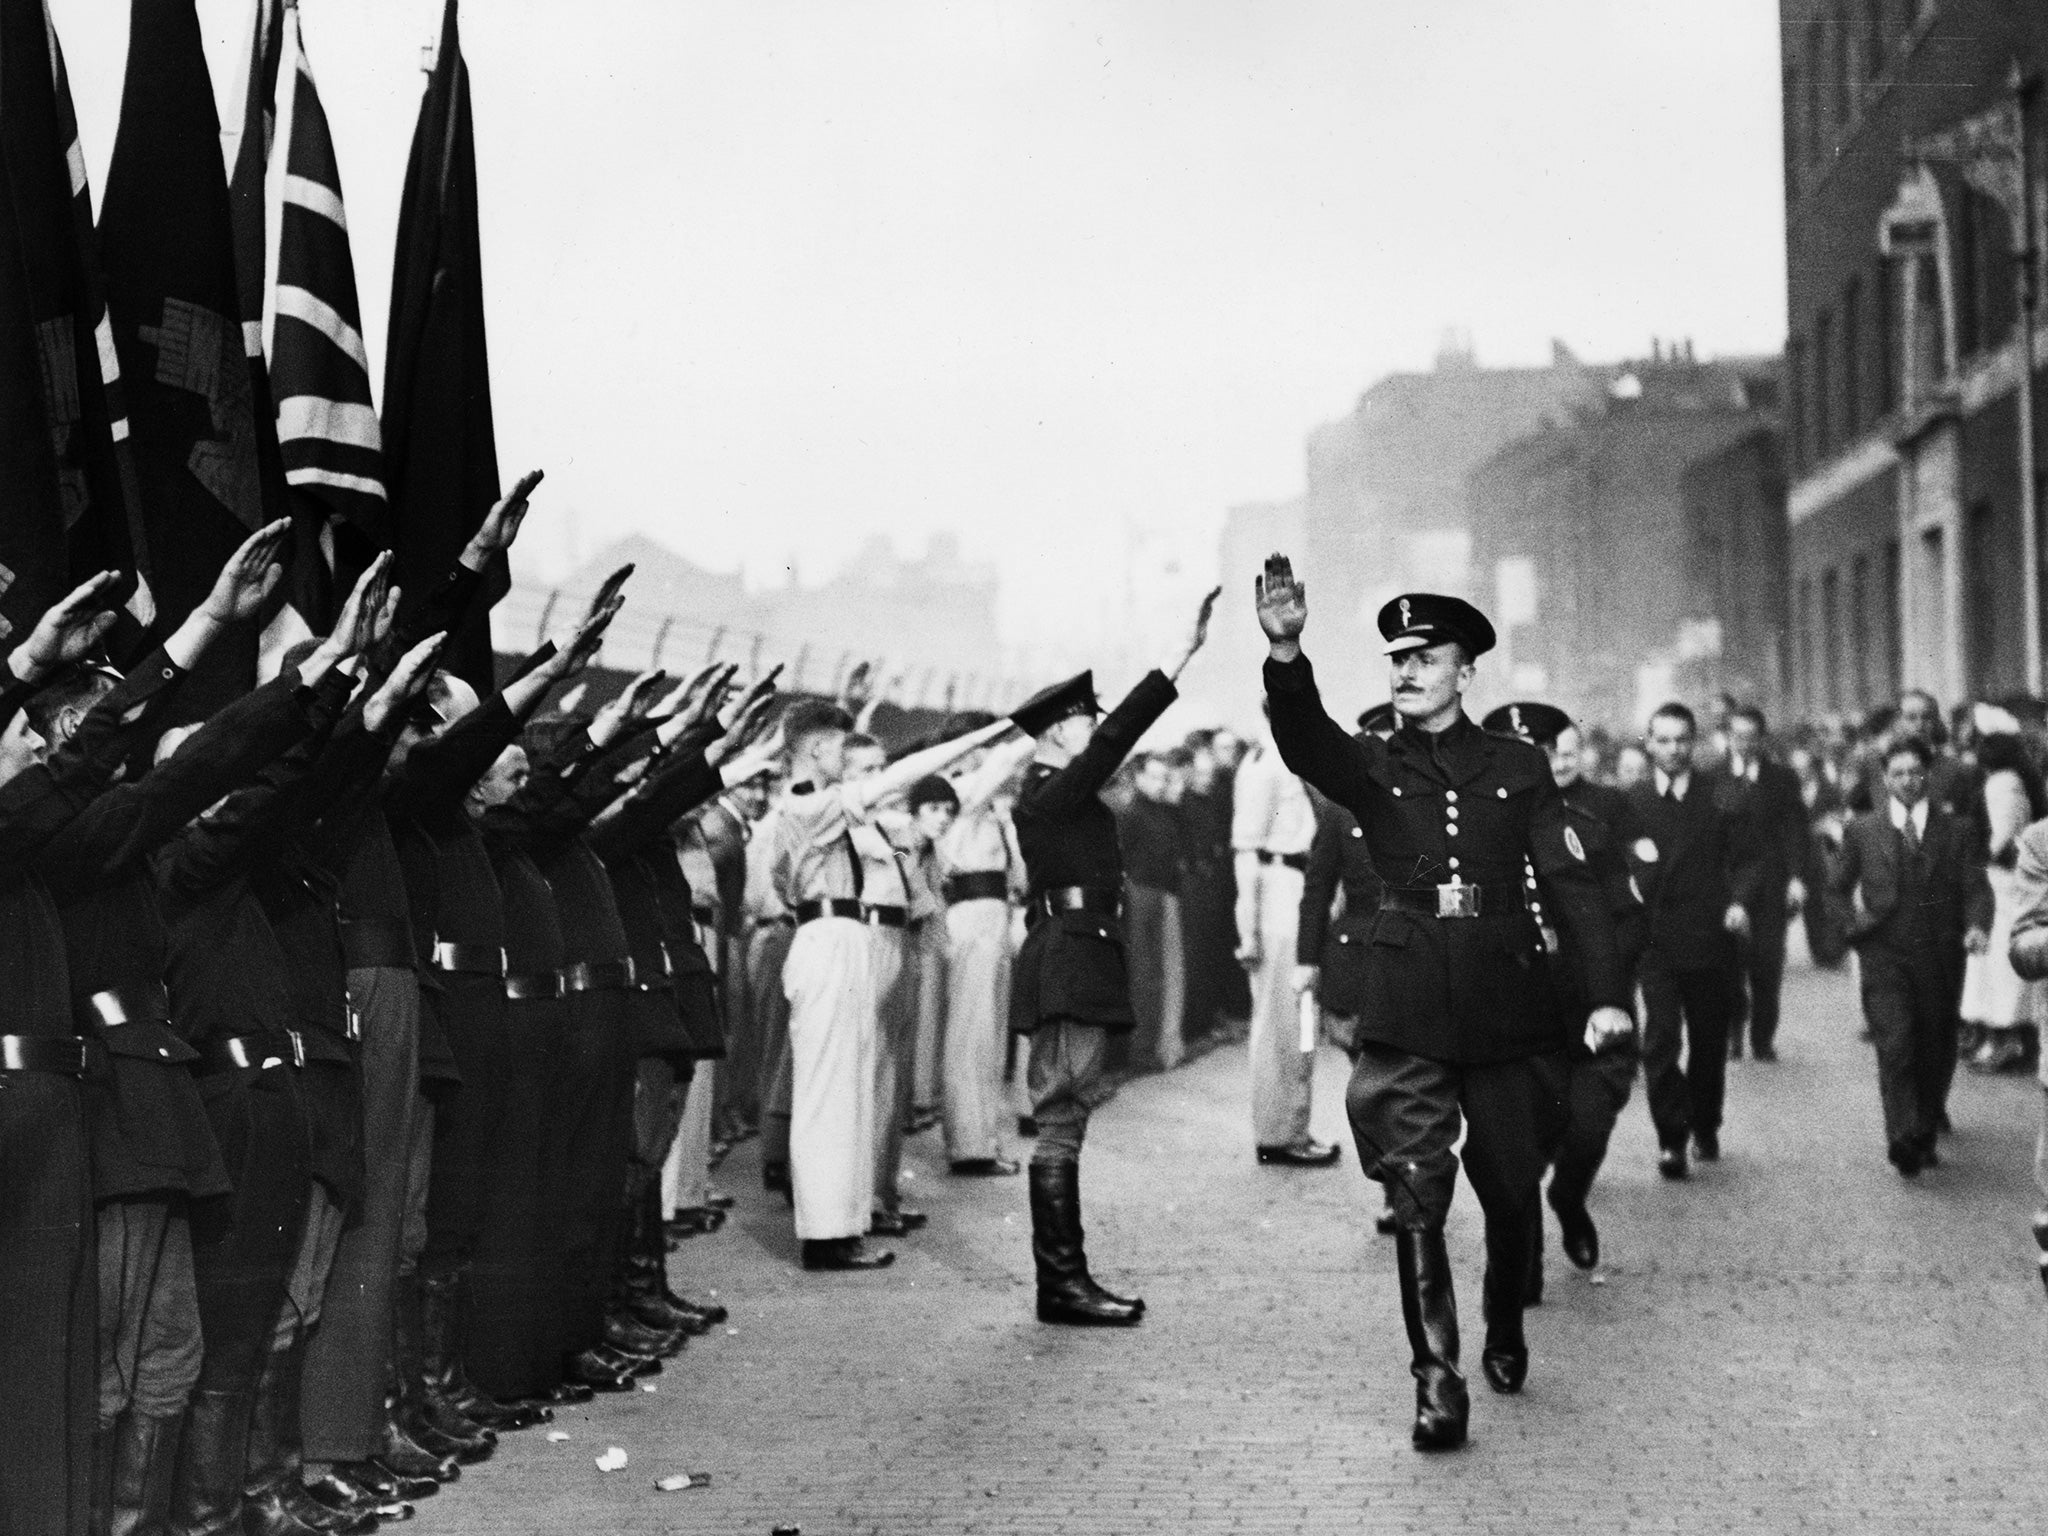 Sir Oswald Mosley, who re-emerged as a fascist leader after the war